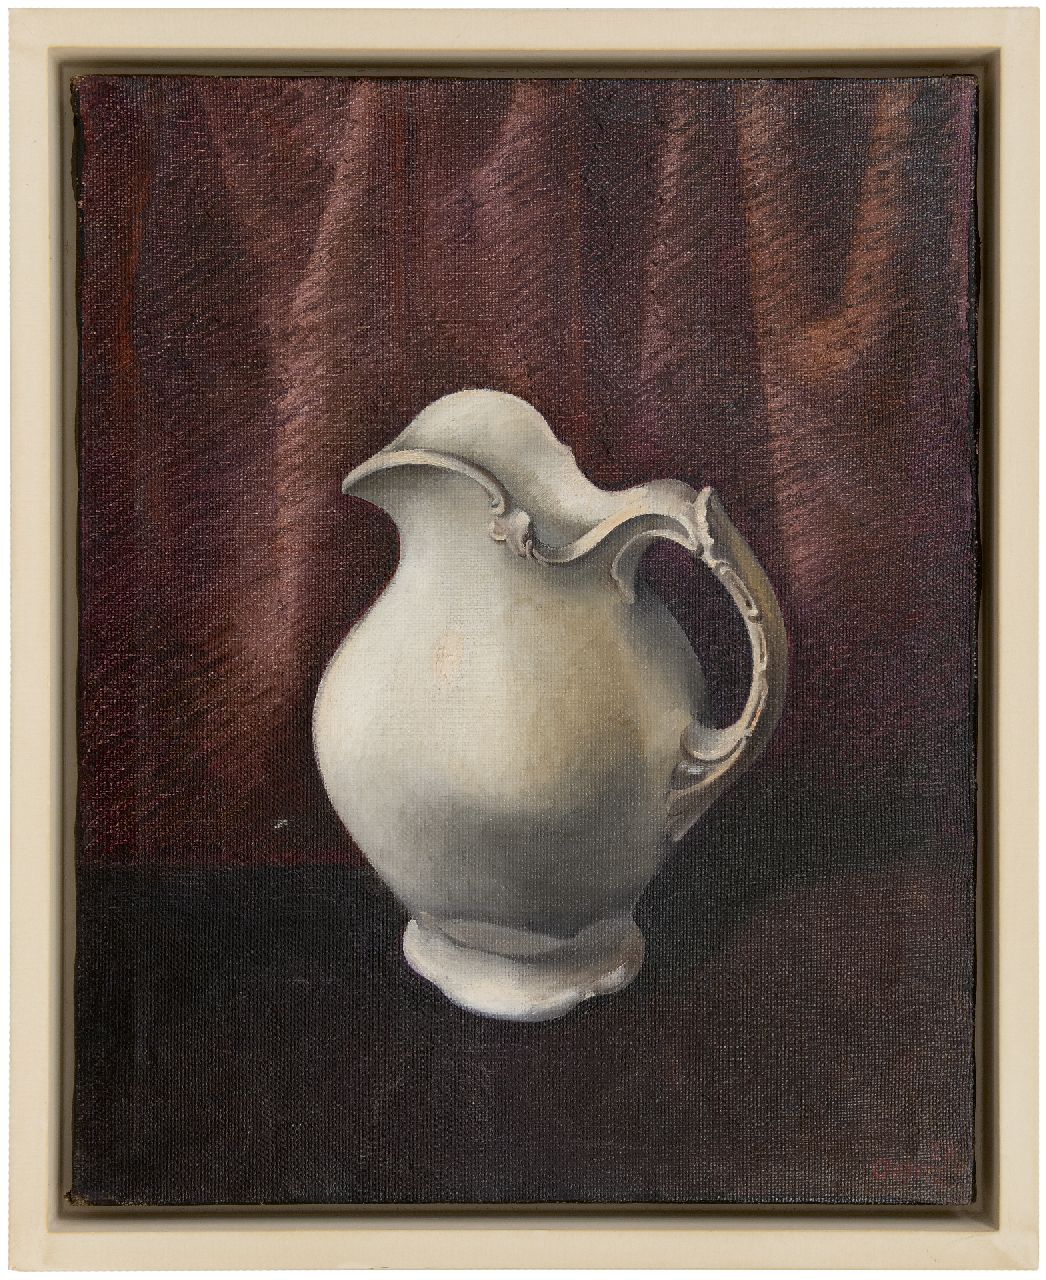 Oepts W.A.  | Willem Anthonie 'Wim' Oepts, Wash basin pitcher, oil on canvas 58.7 x 46.9 cm, signed l.r. and dated '28